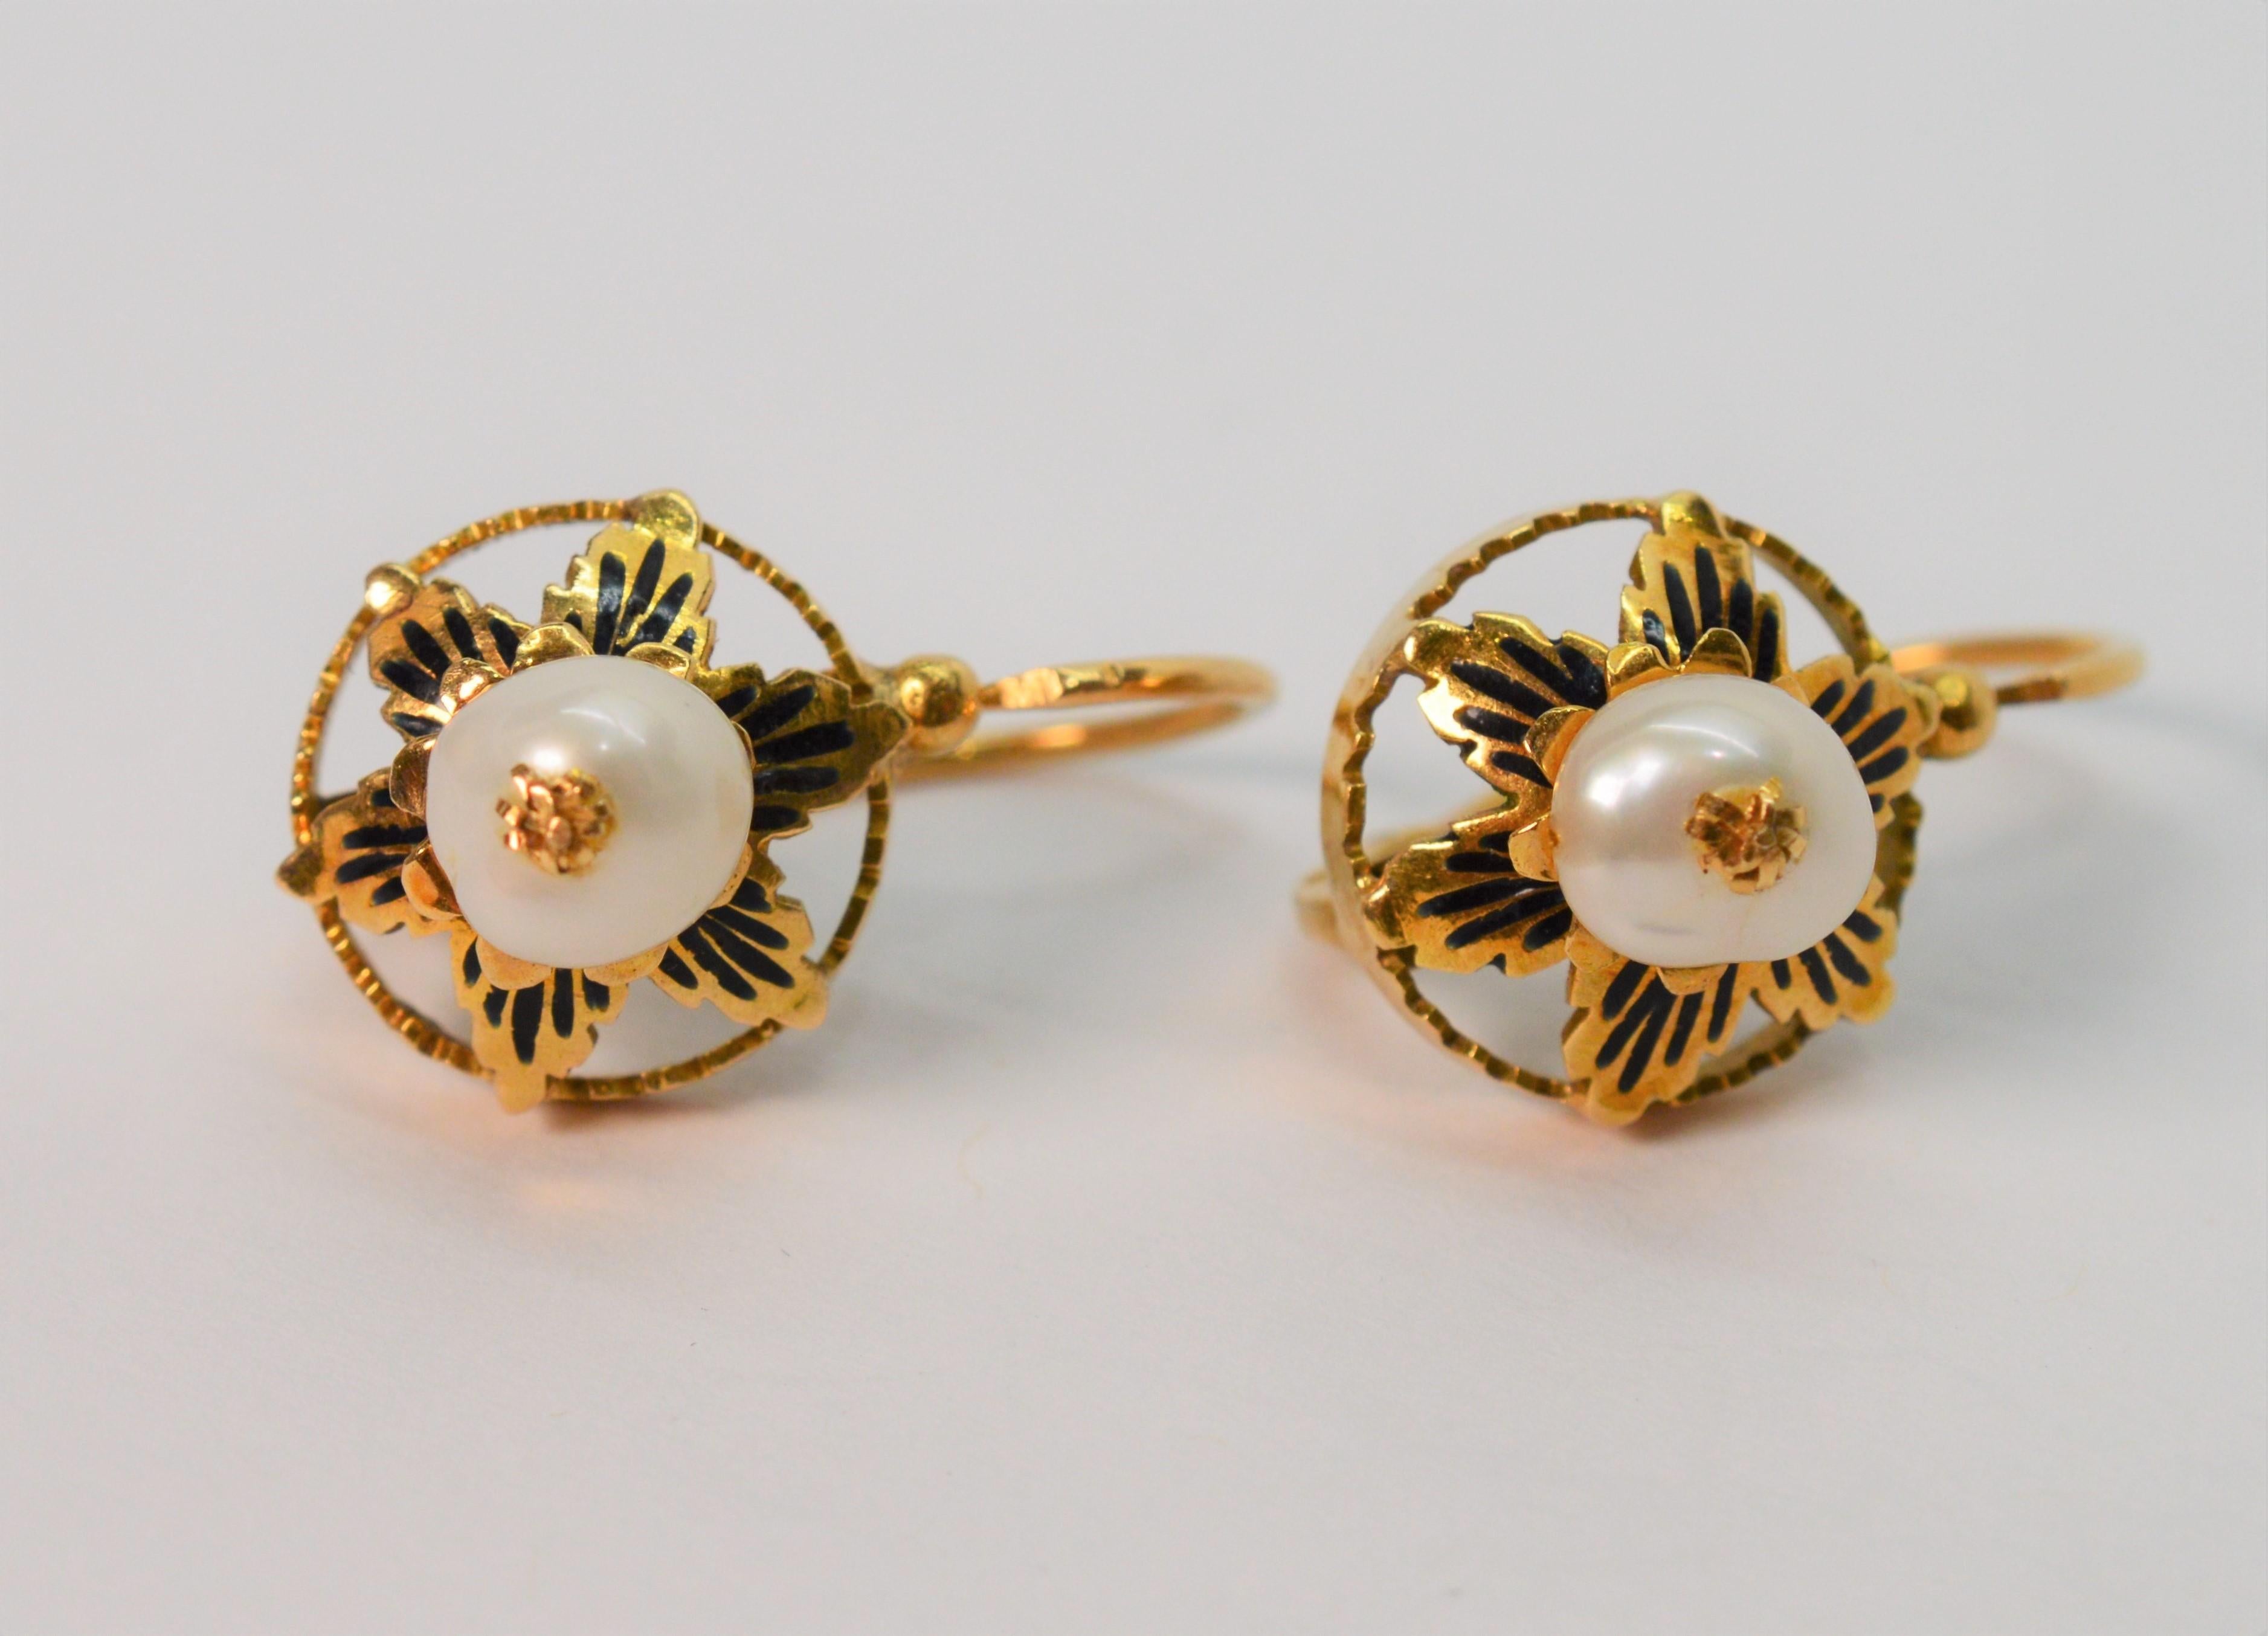 Simple antique elegance, made of 18K yellow gold. Floral inspired with hand painted black enamel accents and natural freshwater pearl centers, this handmade antique pair with lever back closures for pierced ears measures approximately 1/2 inch and